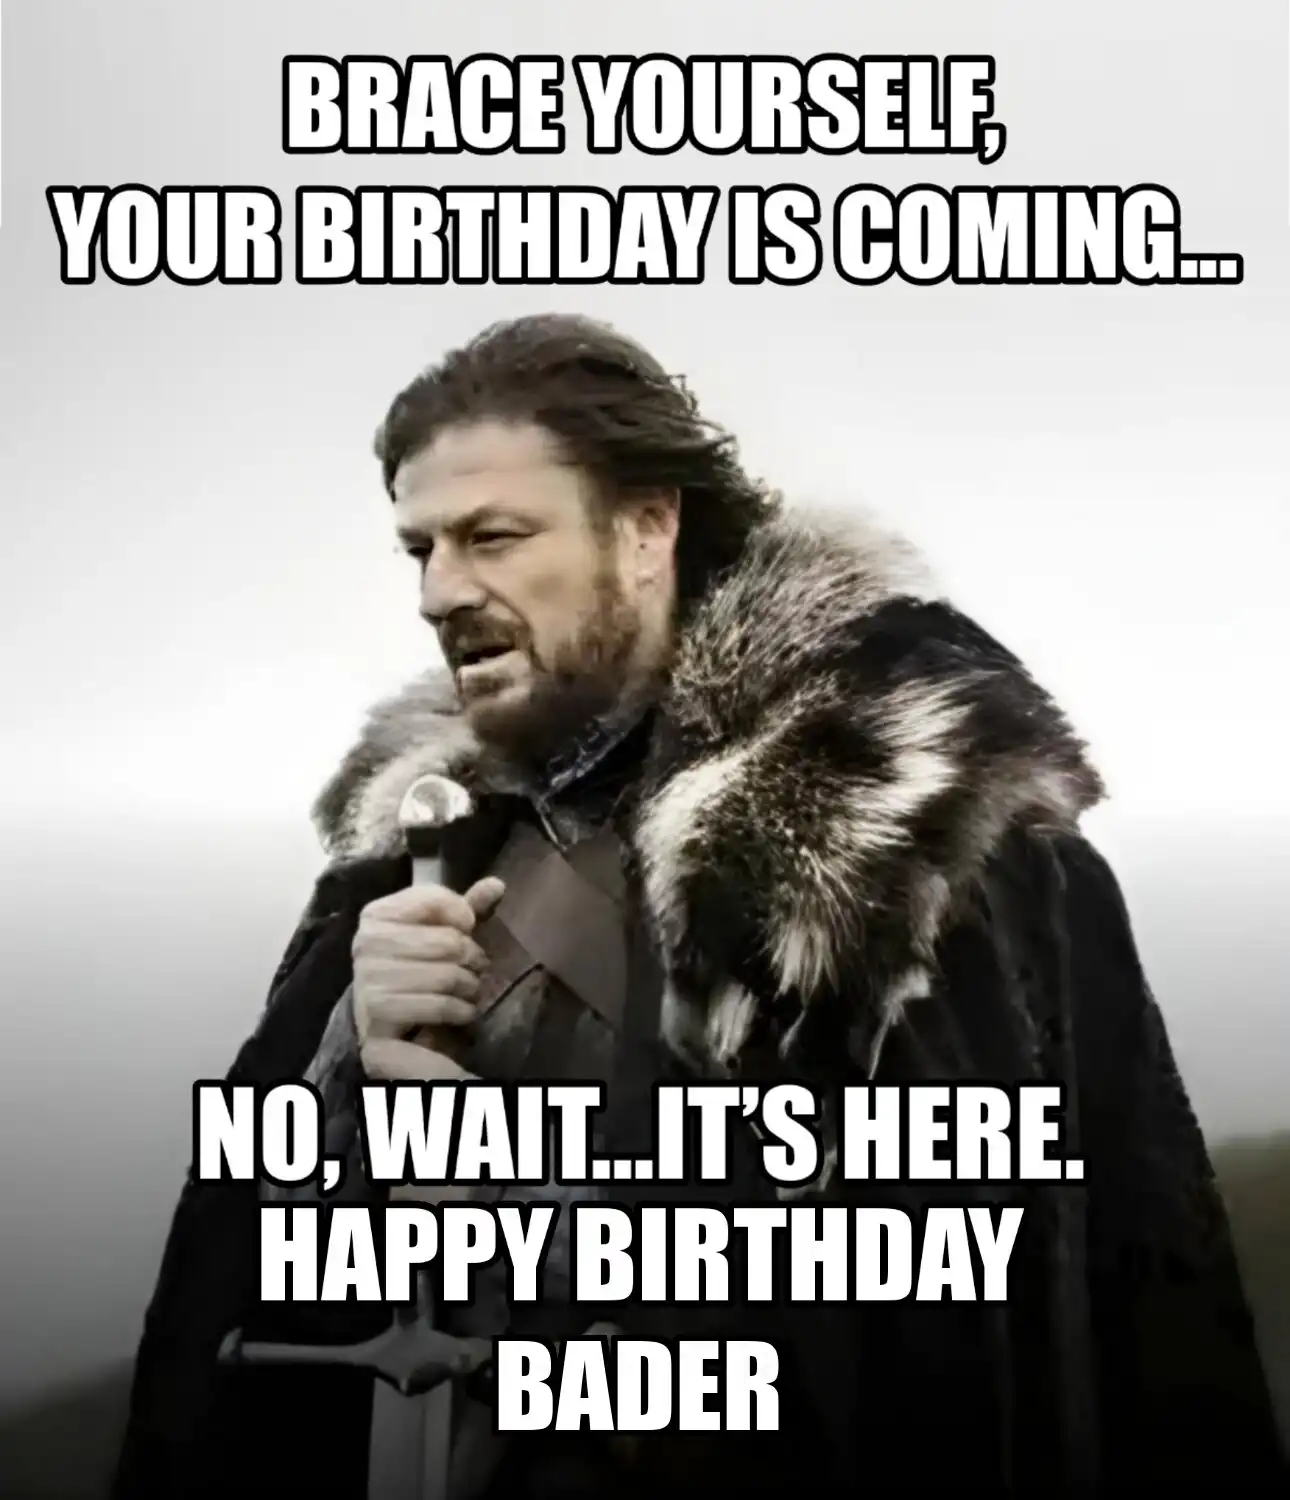 Happy Birthday Bader Brace Yourself Your Birthday Is Coming Meme